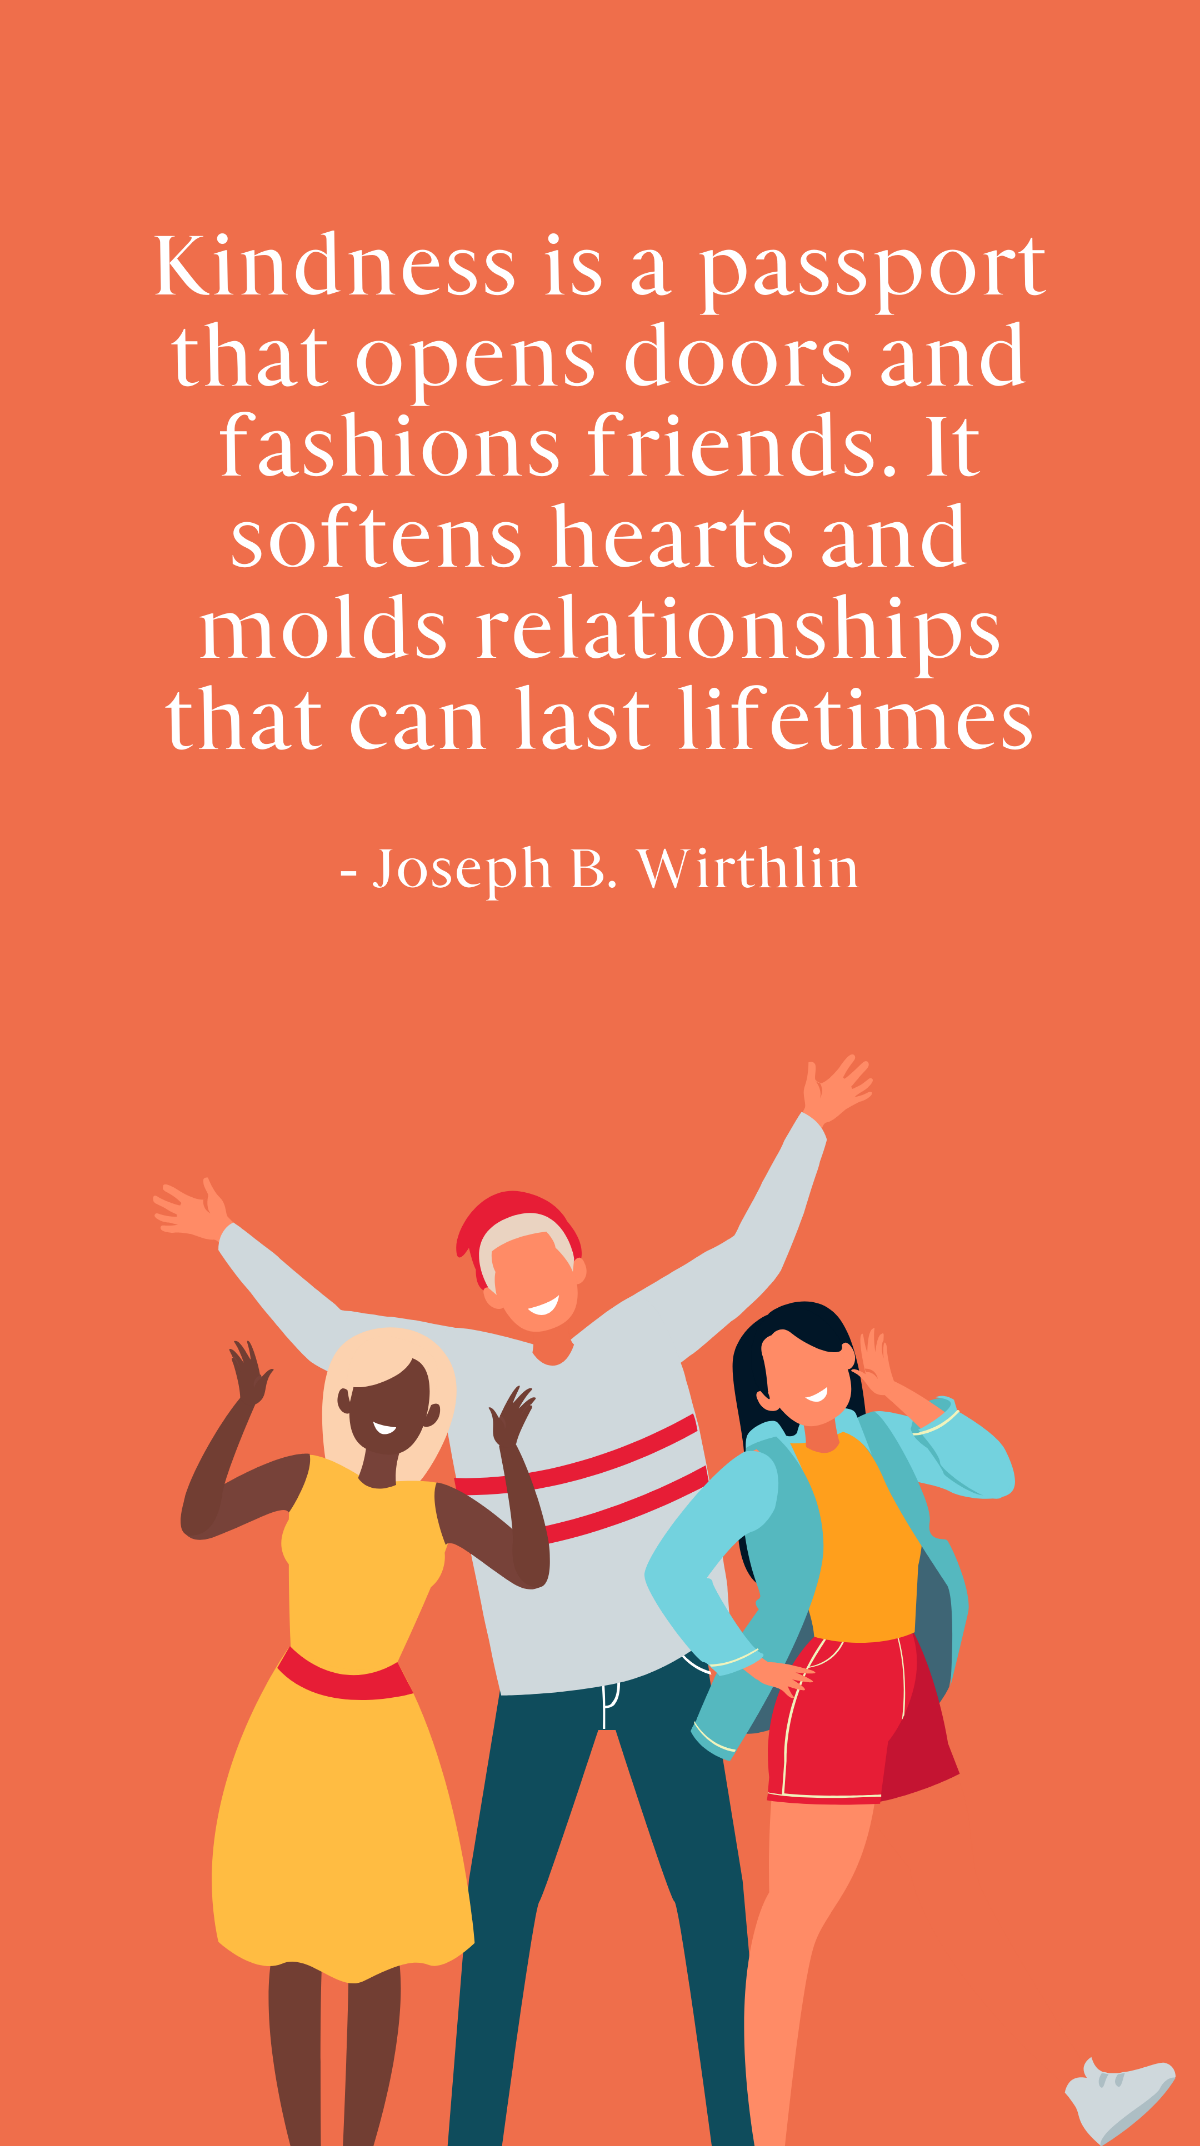 Free Joseph B. Wirthlin - Kindness is a passport that opens doors and fashions friends. It softens hearts and molds relationships that can last lifetimes Template